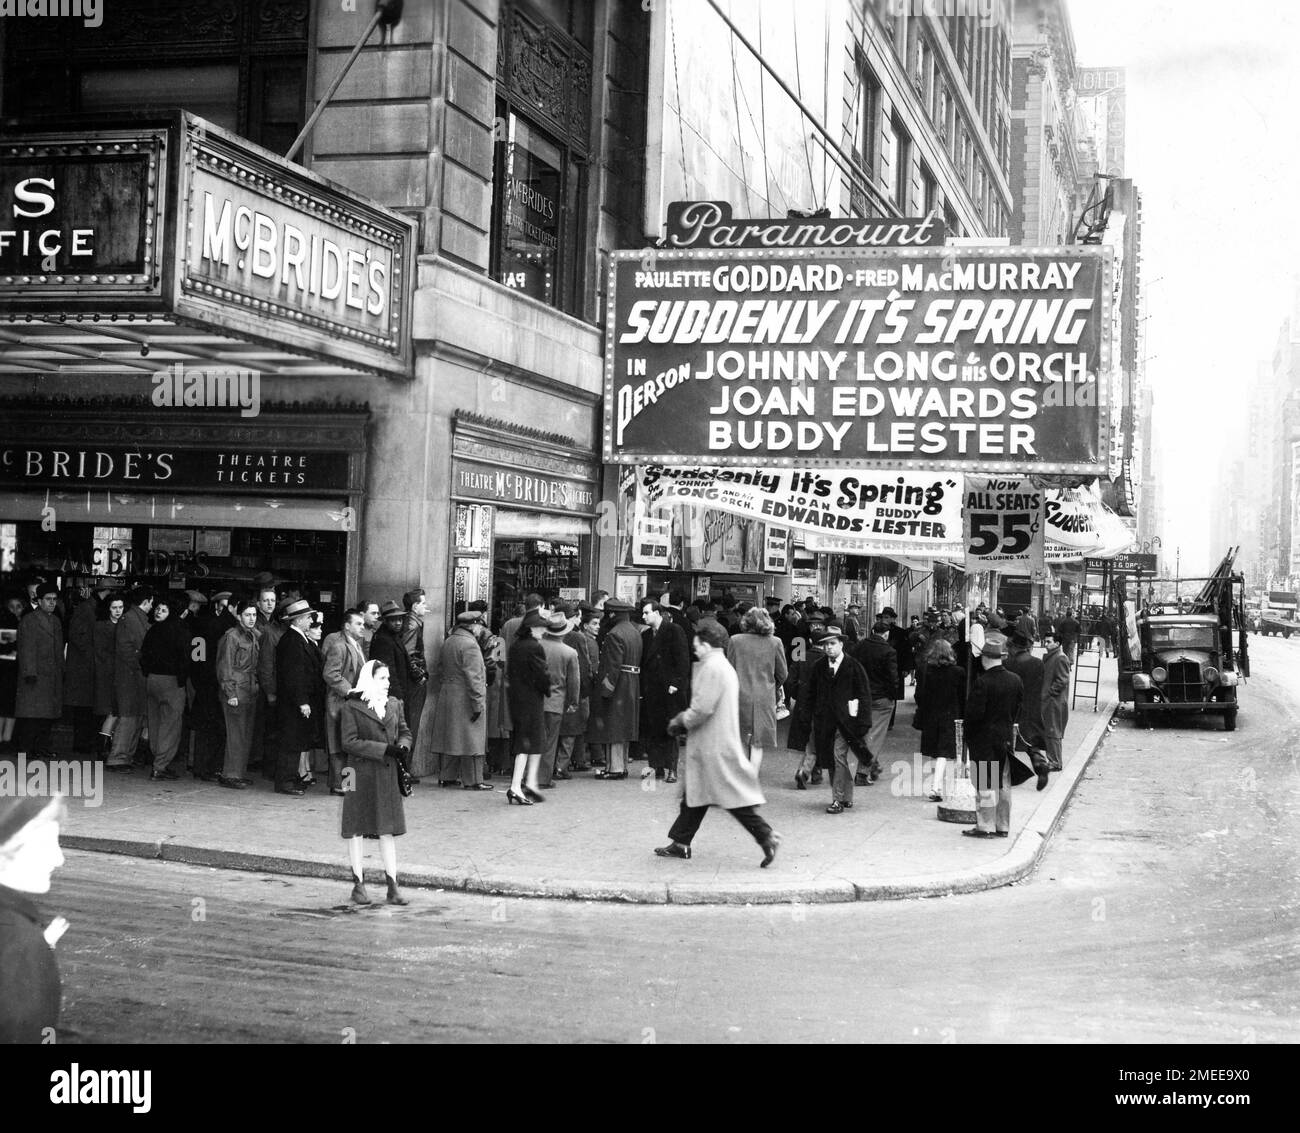 Paramount Movie Theatre in New York in February 1947 showing PAULETTE GODDARD FRED MacMURRAY MACDONALD CAREY and ARLEEN WHELAN in SUDDENLY IT'S SPRING 1947 director MITCHELL LEISEN music Victor Young Paramount Pictures Stock Photo